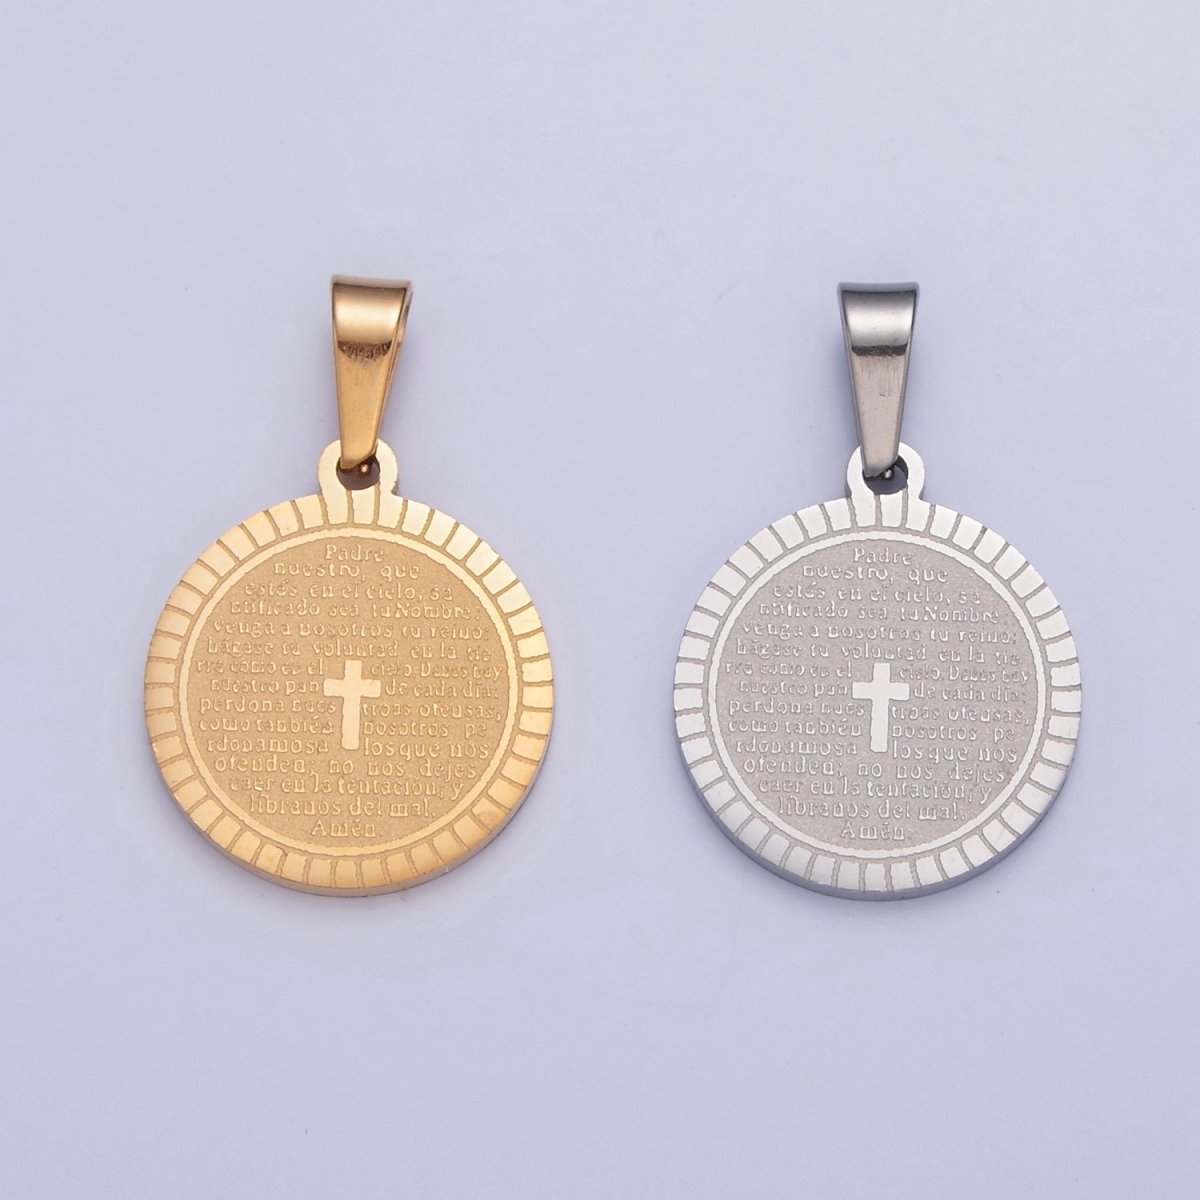 Stainless Steel Round Medallion, The Lord's Prayer in Spanish, Religious Cross in Silver & Gold I-439 I-444 - DLUXCA